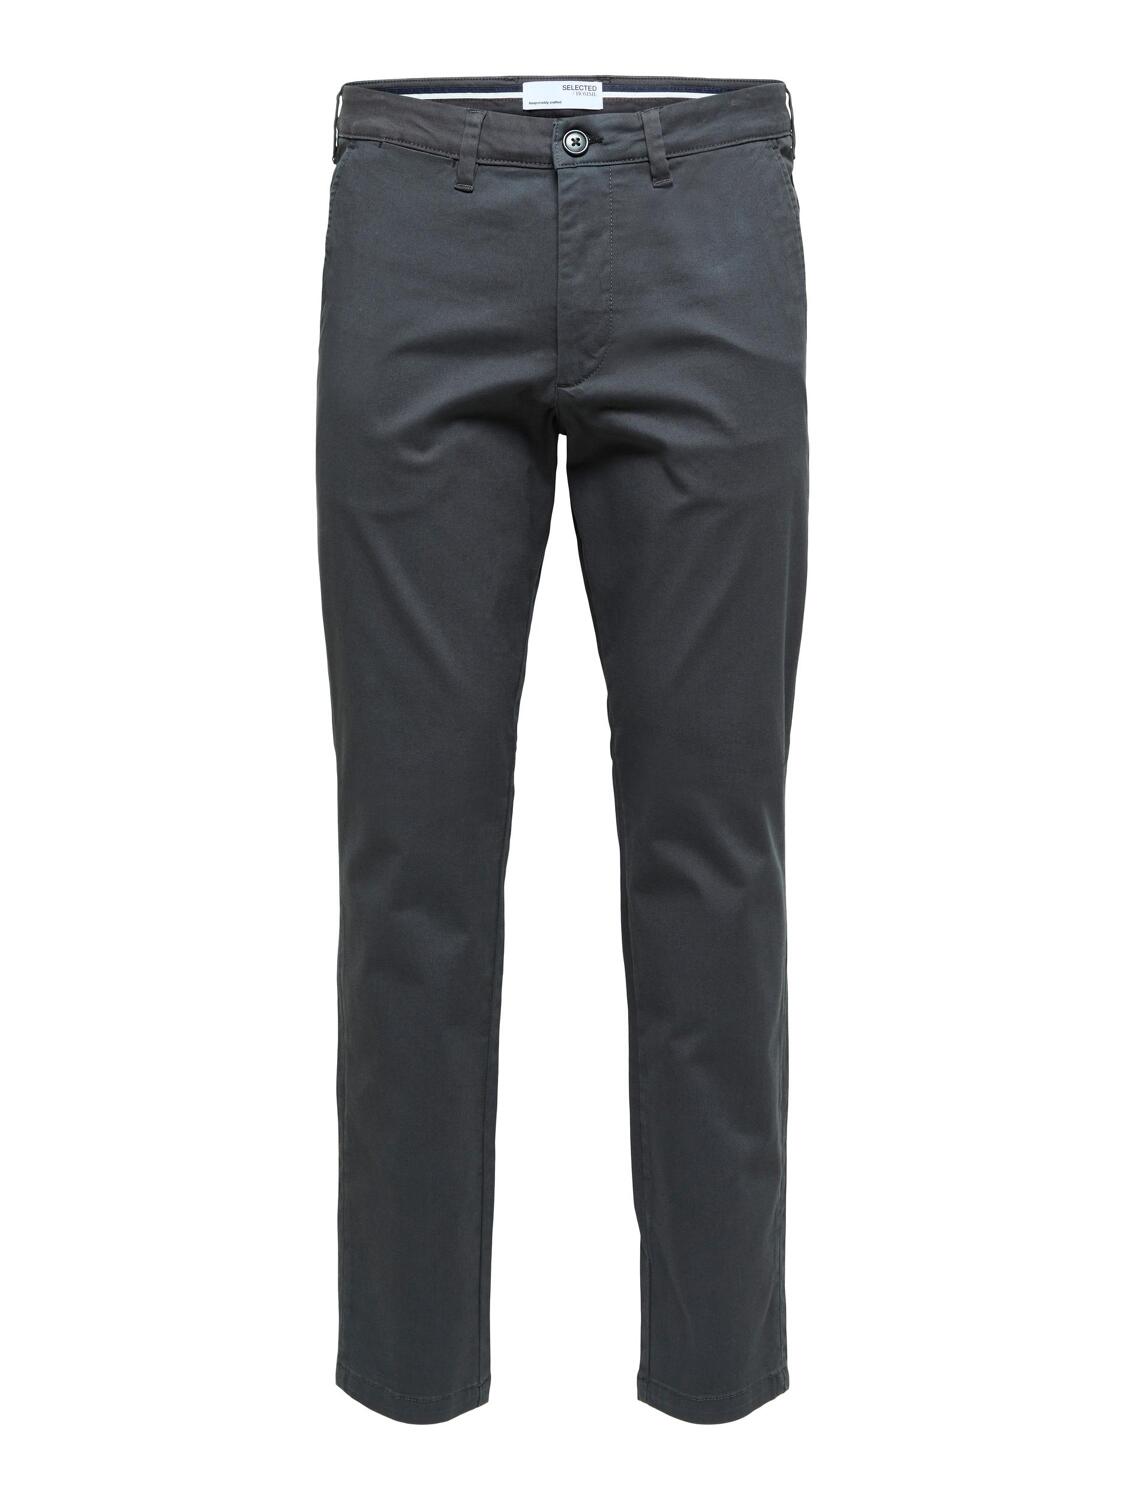 SELECTED HOMME SLHSLIM-MILES FLEX | NOOS W Deutschland CHINO PANTS